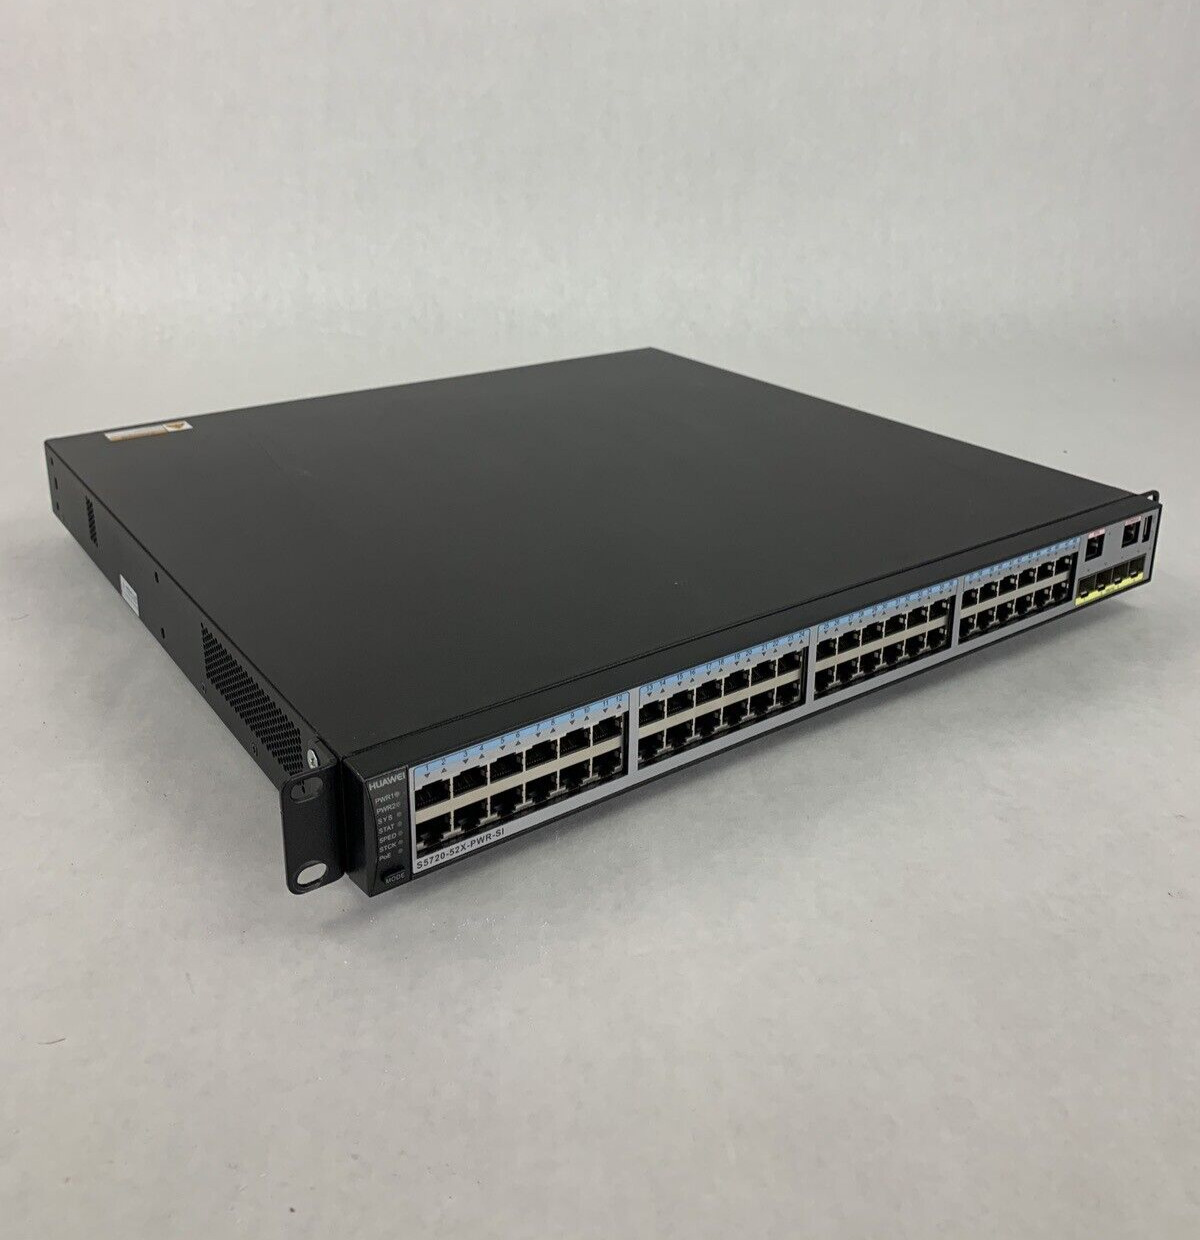 Huawei S5720-52X-PWR-SI Layer 3 Ethernet Network Managed Switch